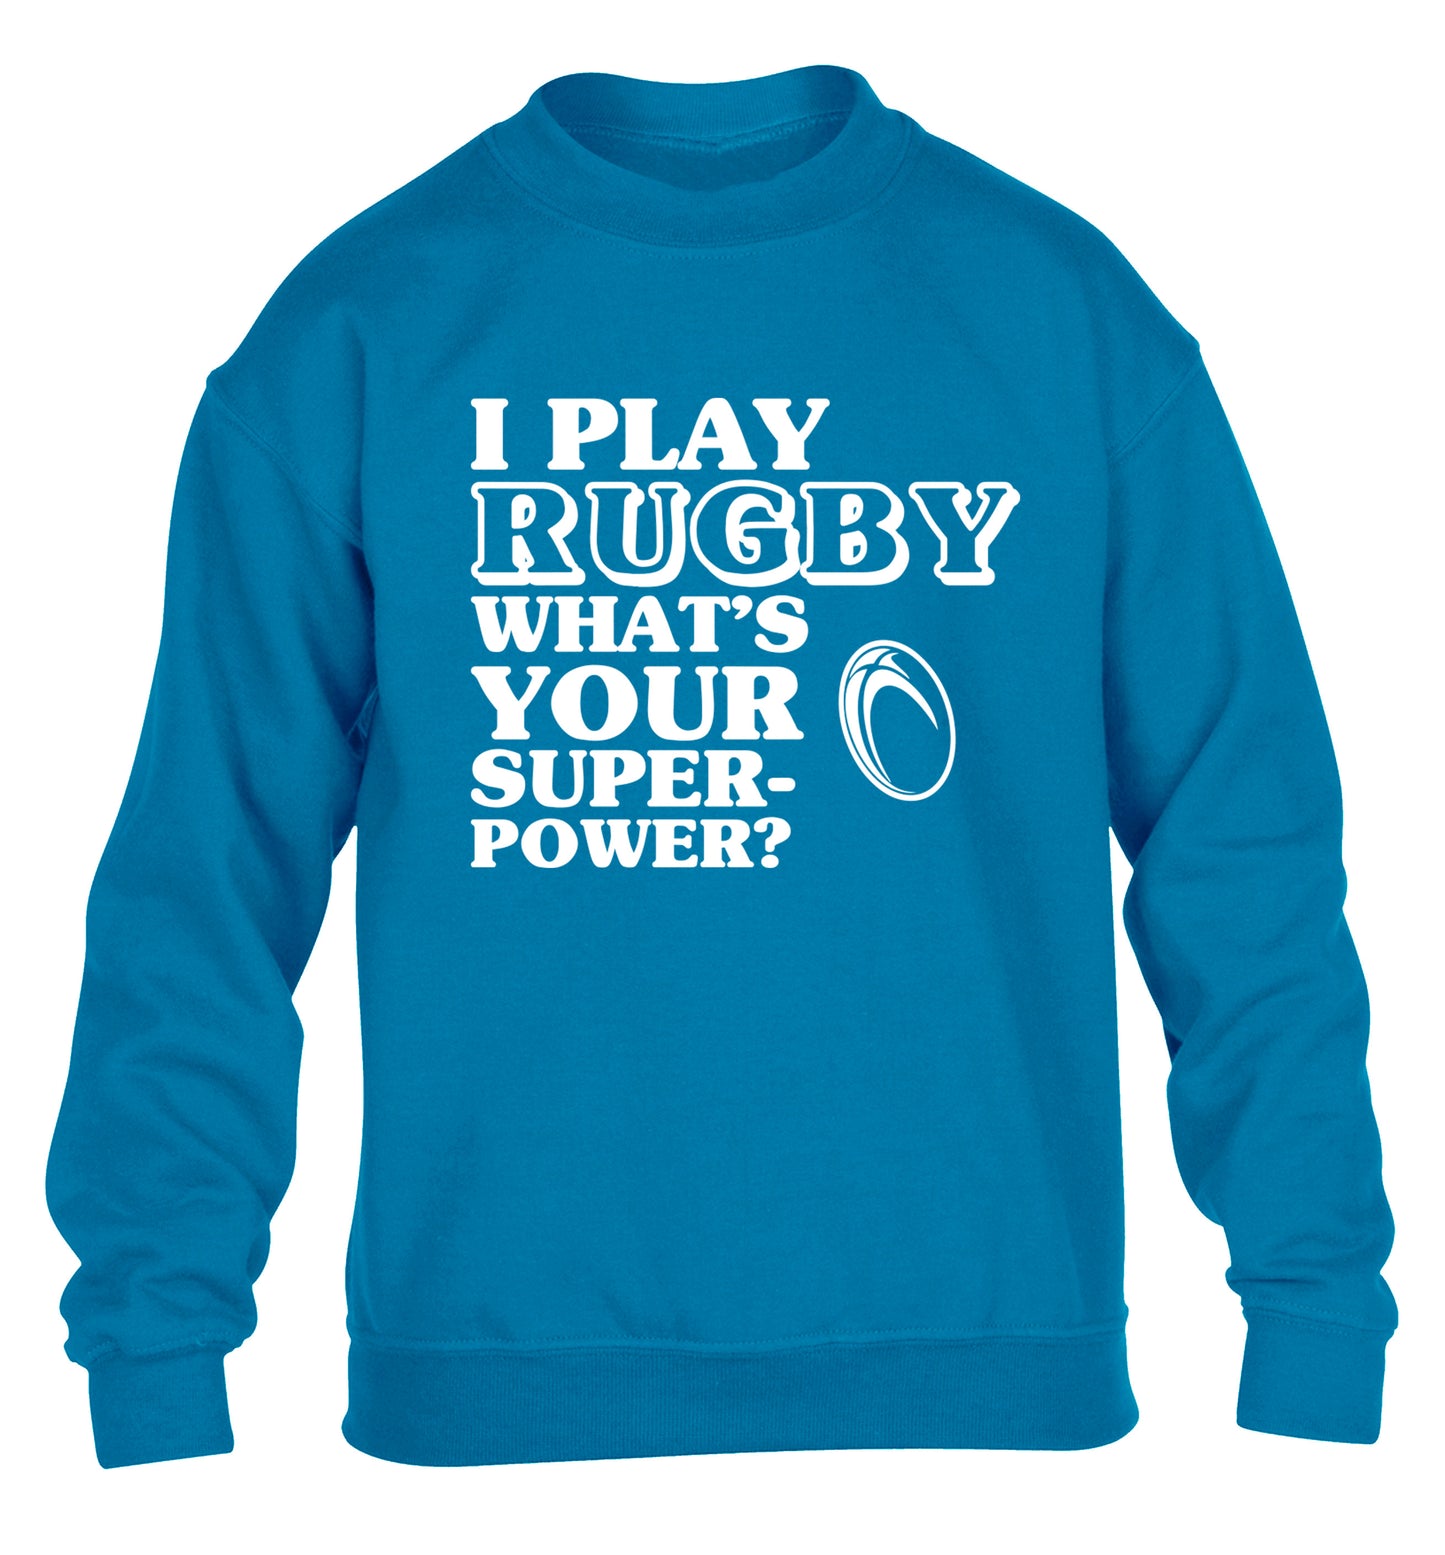 I play rugby what's your superpower? children's blue sweater 12-13 Years